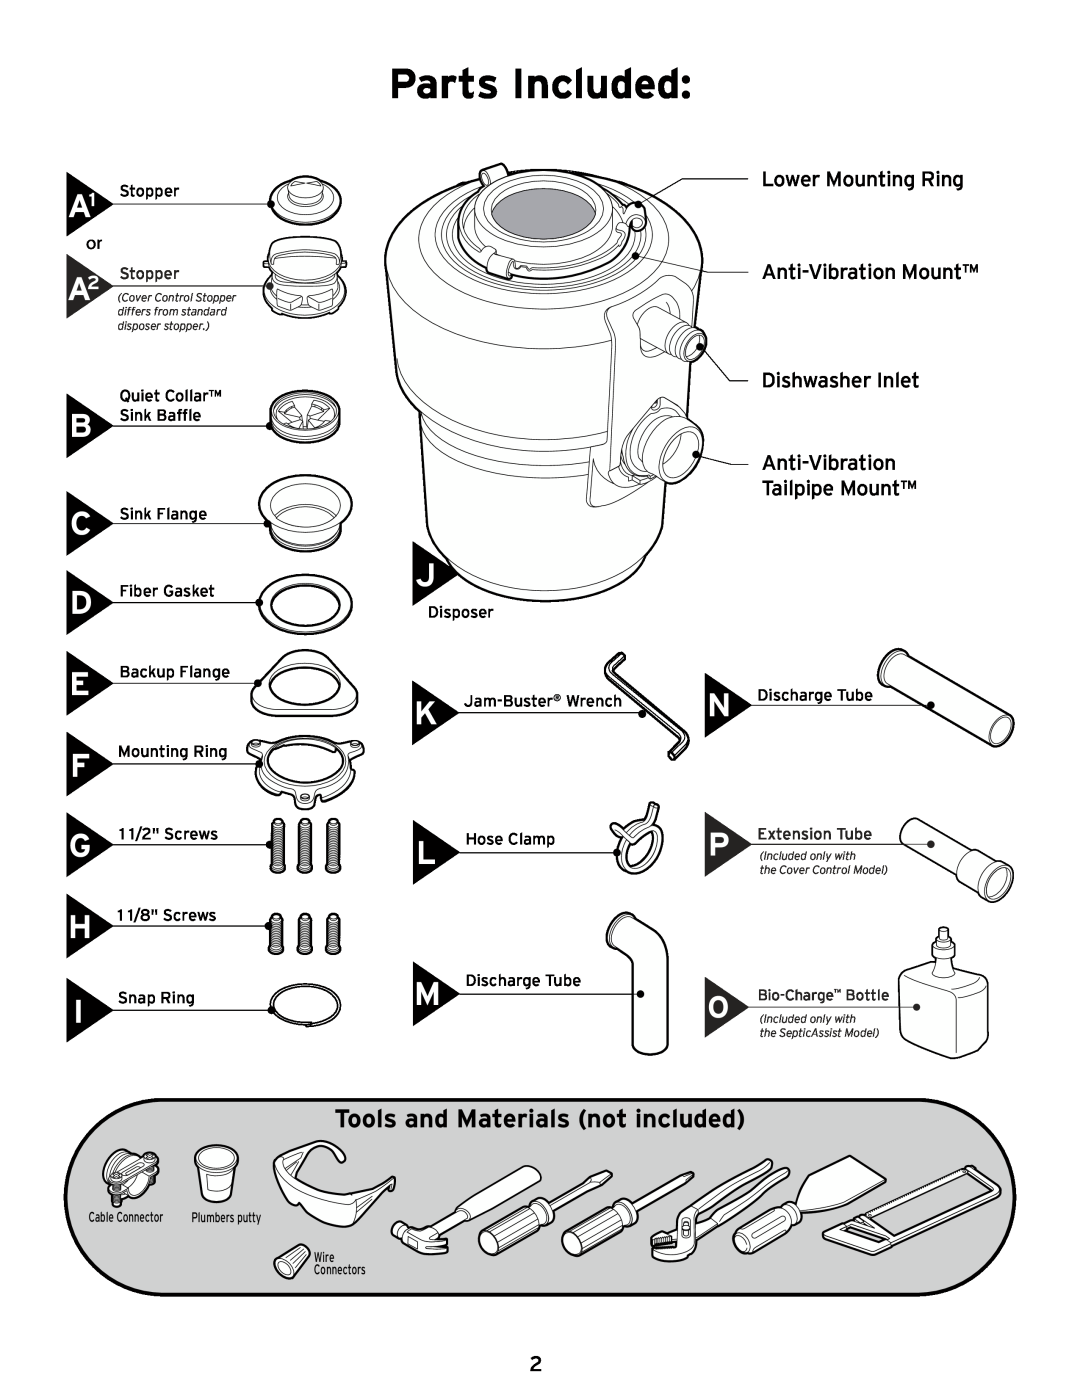 InSinkErator Evolution Excel Parts Included, Tools and Materials not included, A1 Stopper, I Snap Ring, Disposer 